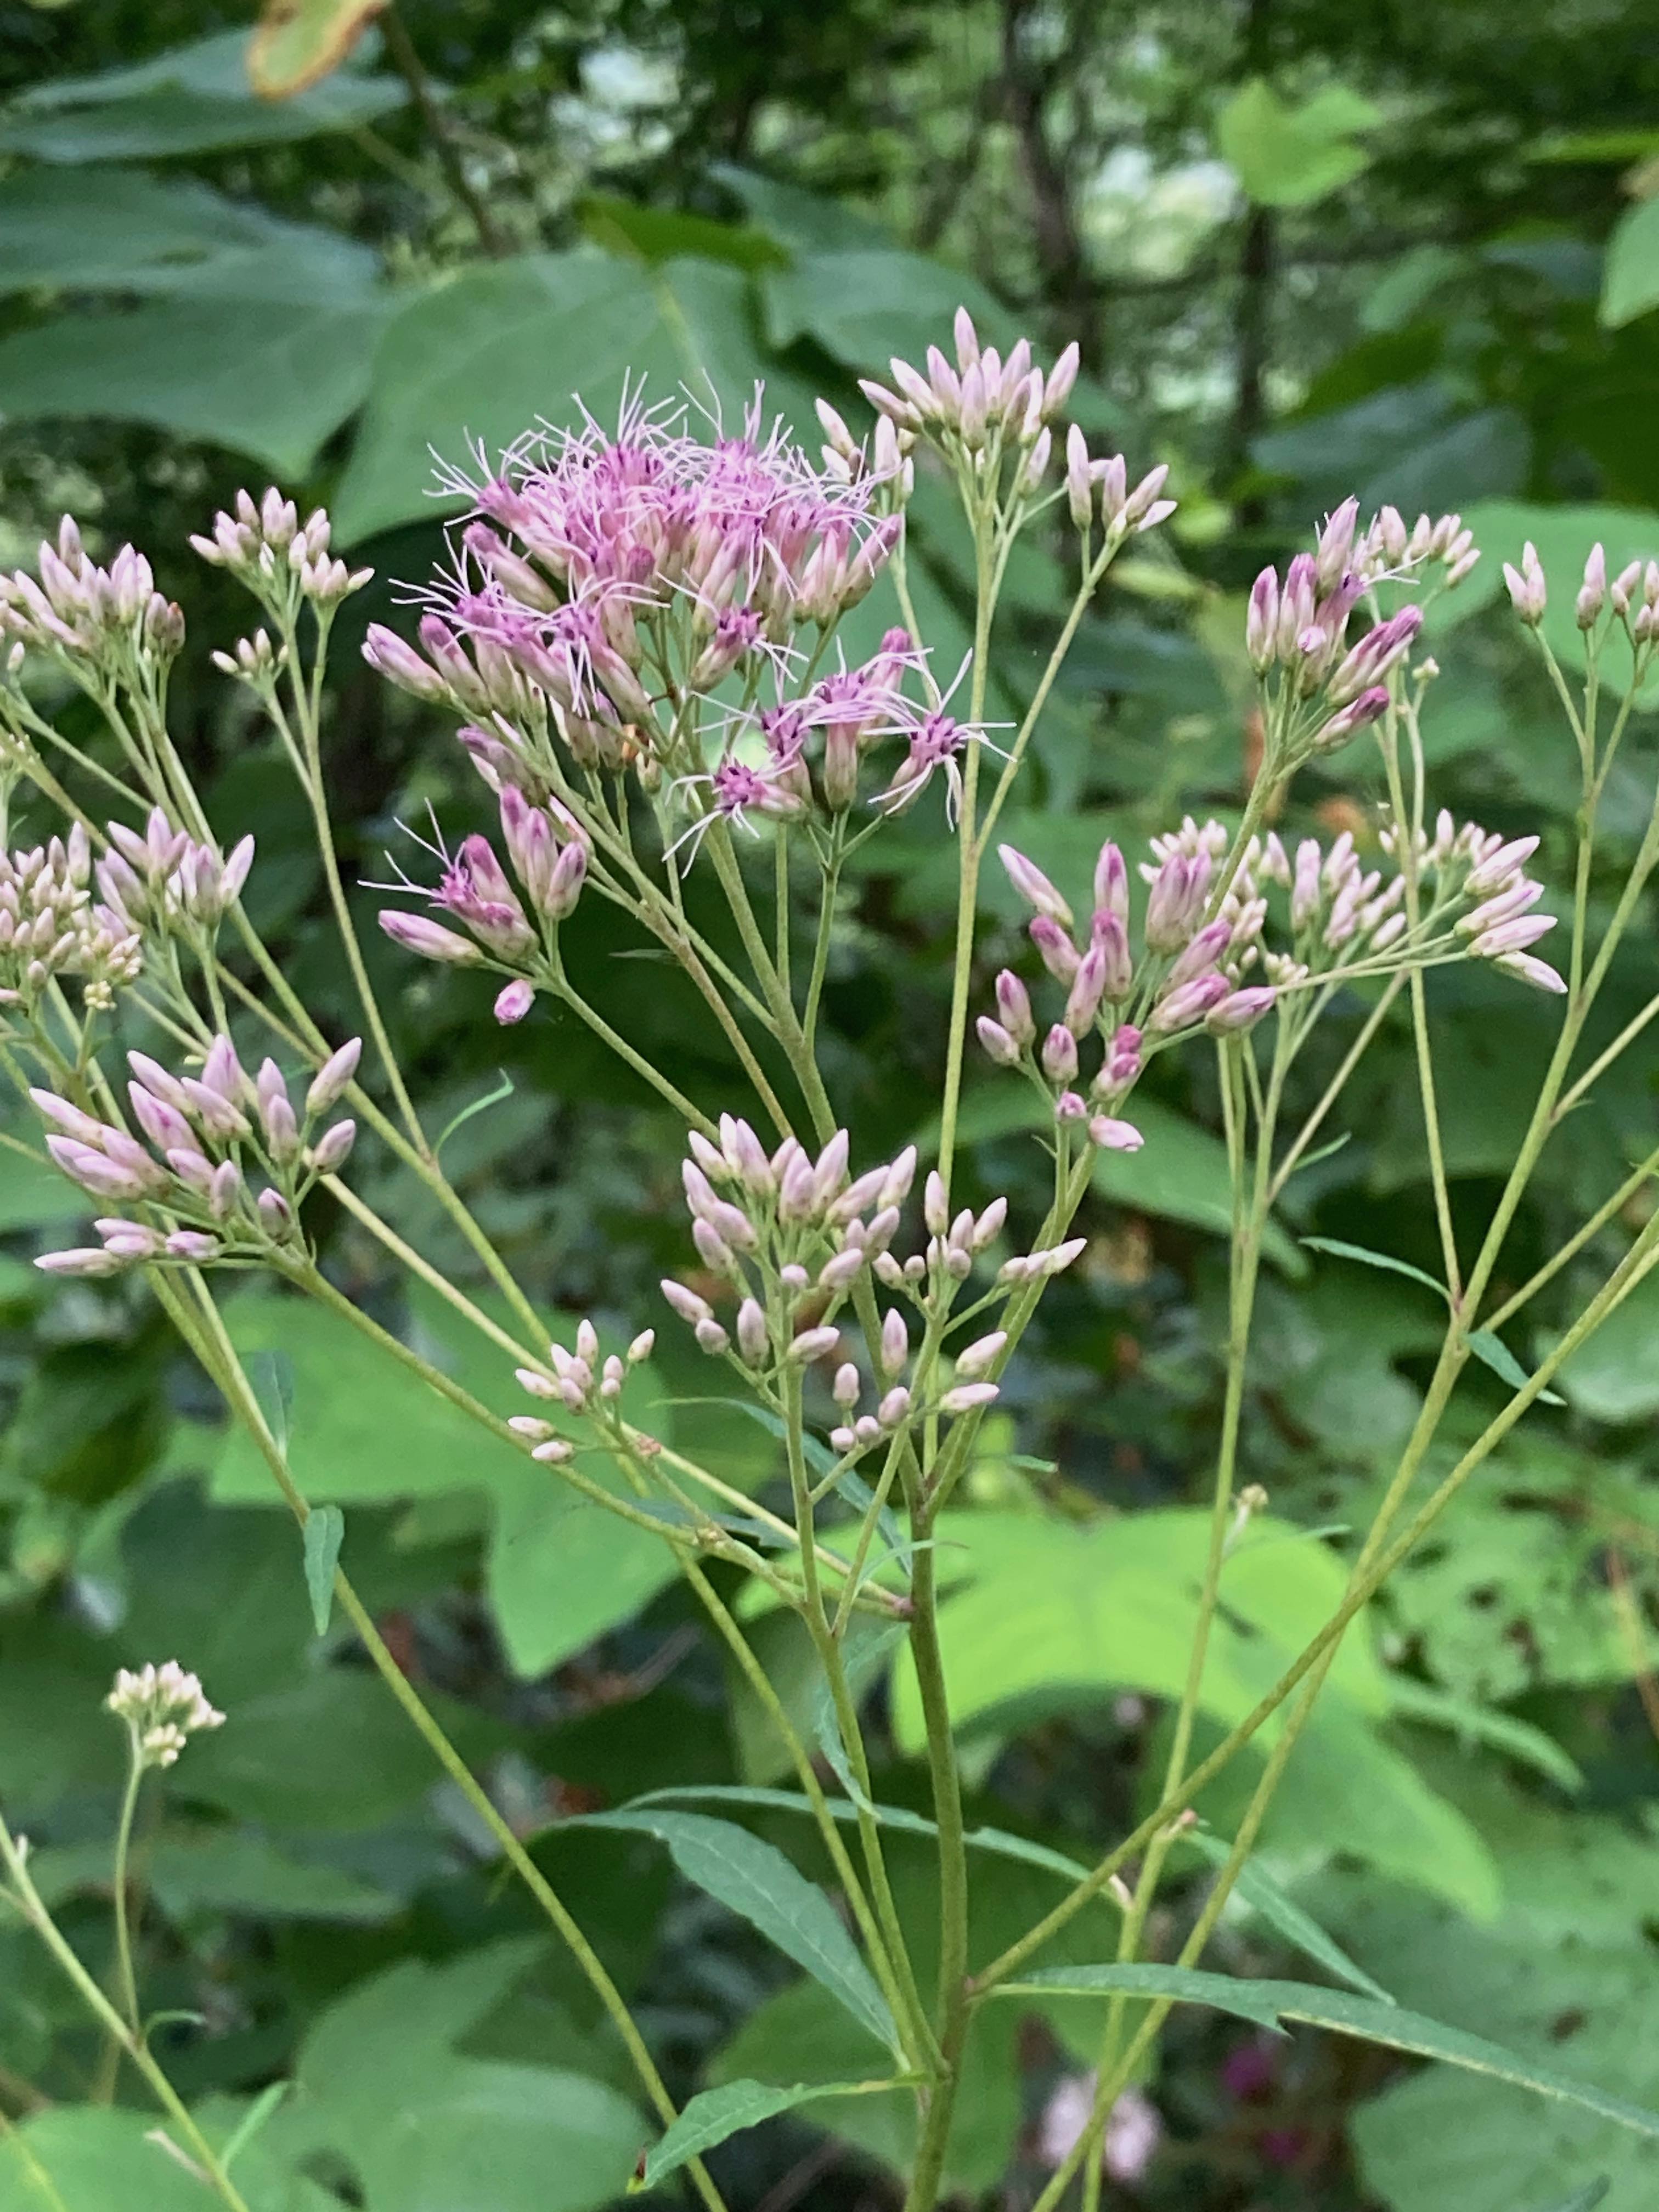 The Scientific Name is Eutrochium fistulosum  [= Eupatorium fistulosum]. You will likely hear them called Hollow-stem Joe-Pye-weed, Queen of the Meadow. This picture shows the The inflorescence is a terminal panicle of flowerheads. Each flowerhead consists of pink disc florets, ray florets are lacking. of Eutrochium fistulosum  [= Eupatorium fistulosum]